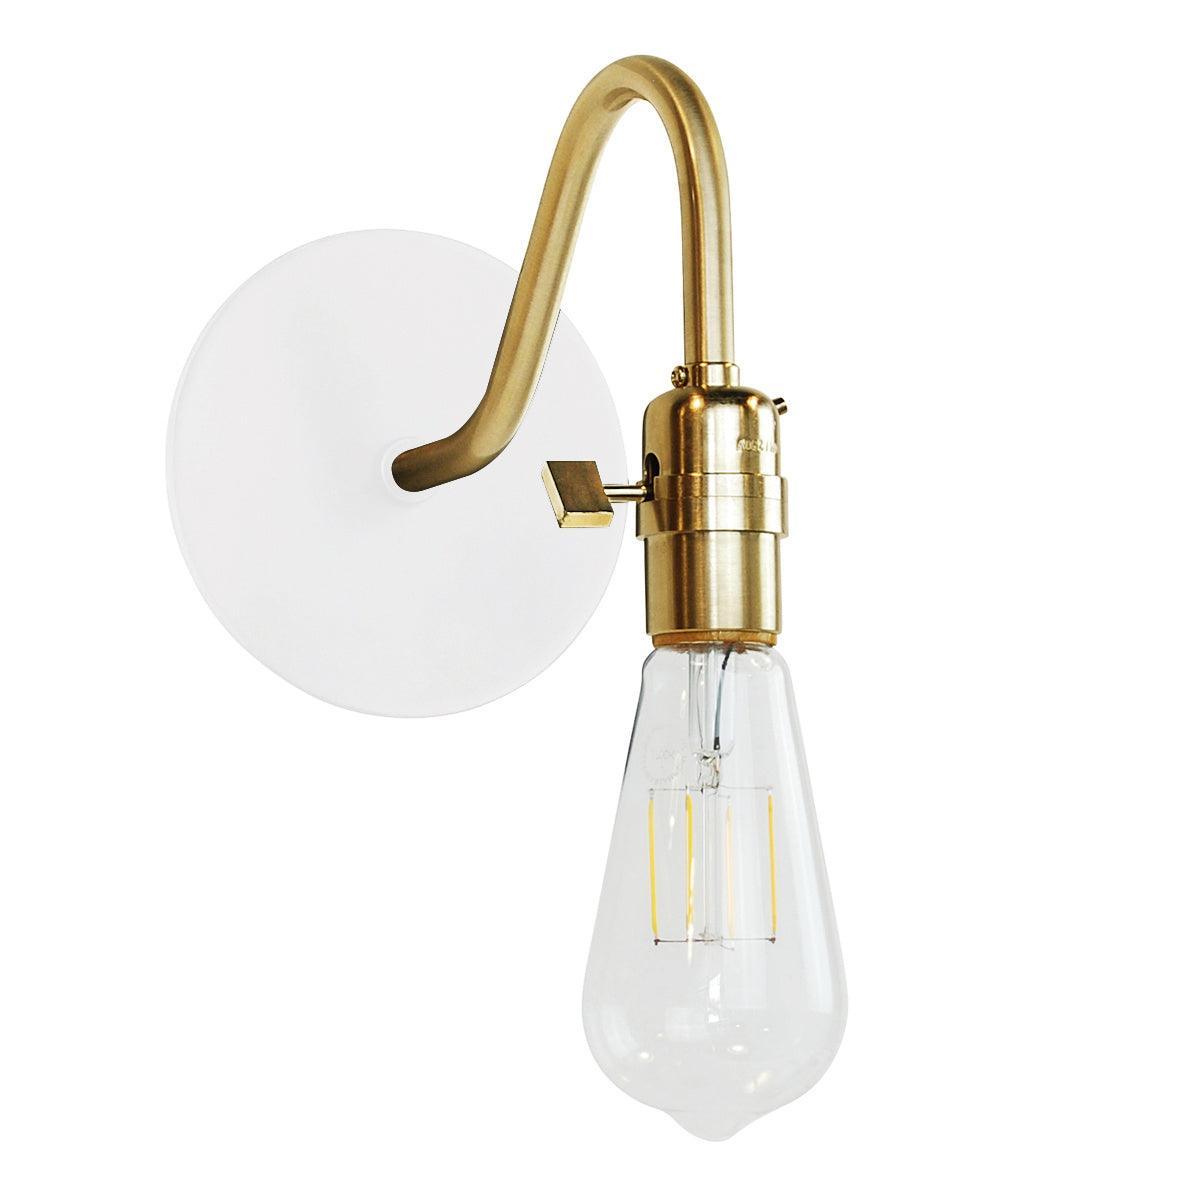 Montclair Light Works - Uno SCL400 Wall Sconce - SCL400-44-91 | Montreal Lighting & Hardware